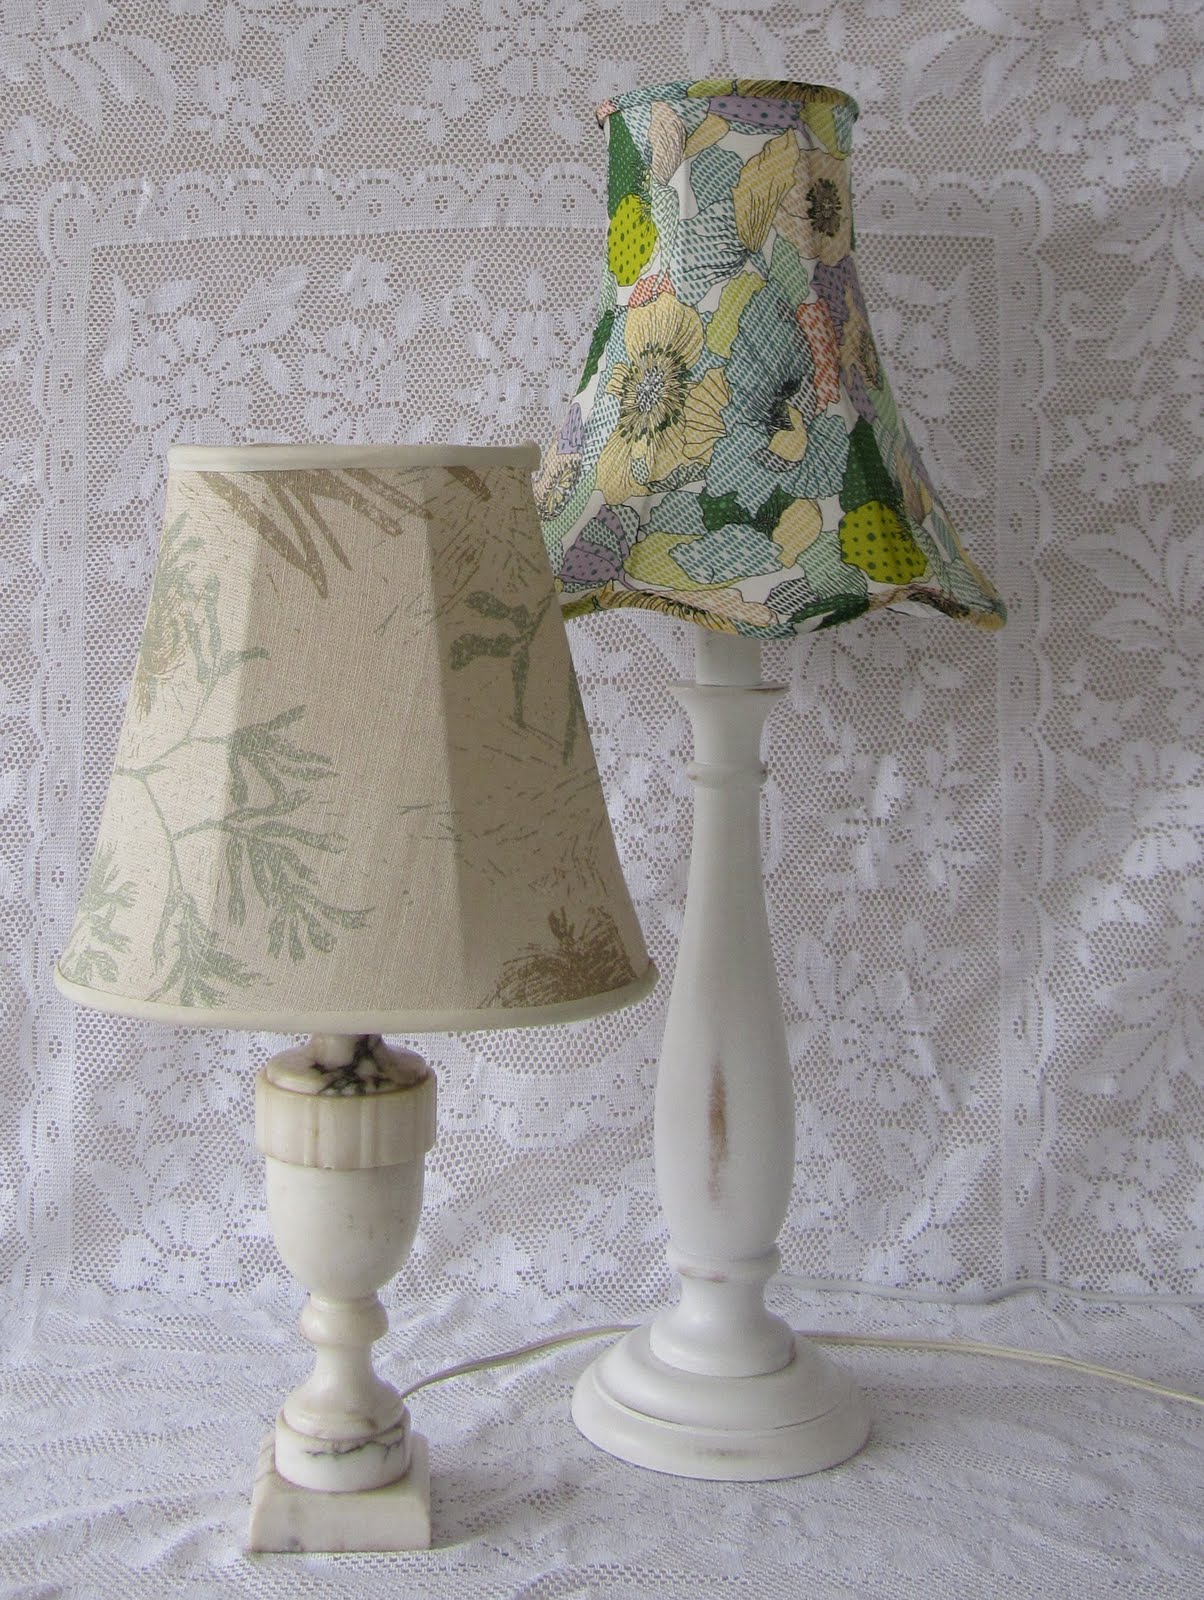 Recover A Lampshade Tutorial, How To Replace Lampshade Cover